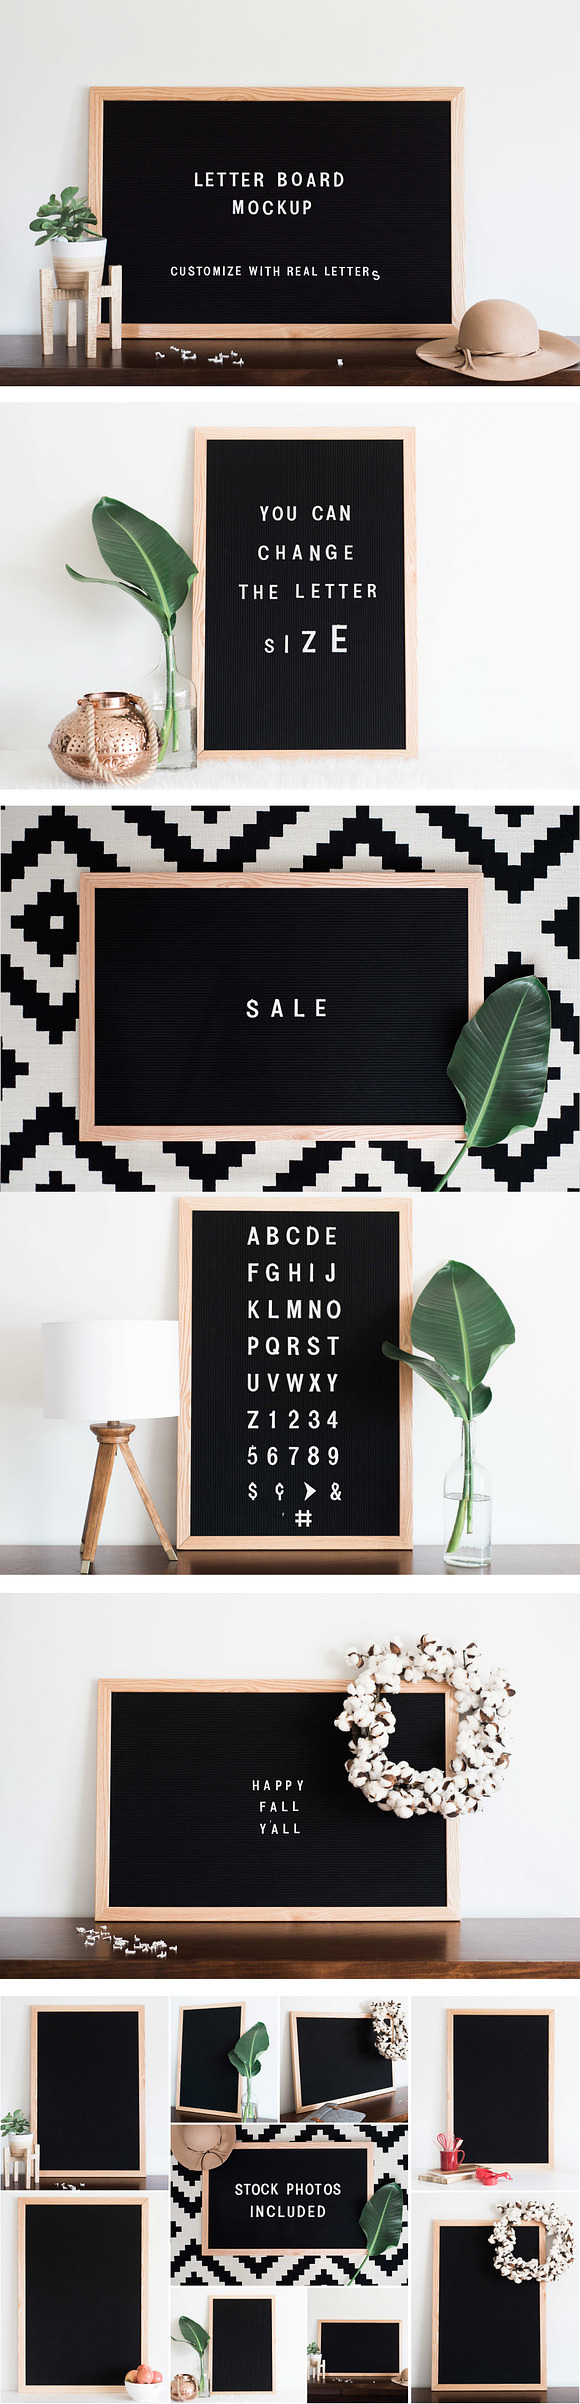 Felt Letter Board Mockup PSD in Social Media Templates - product preview 6